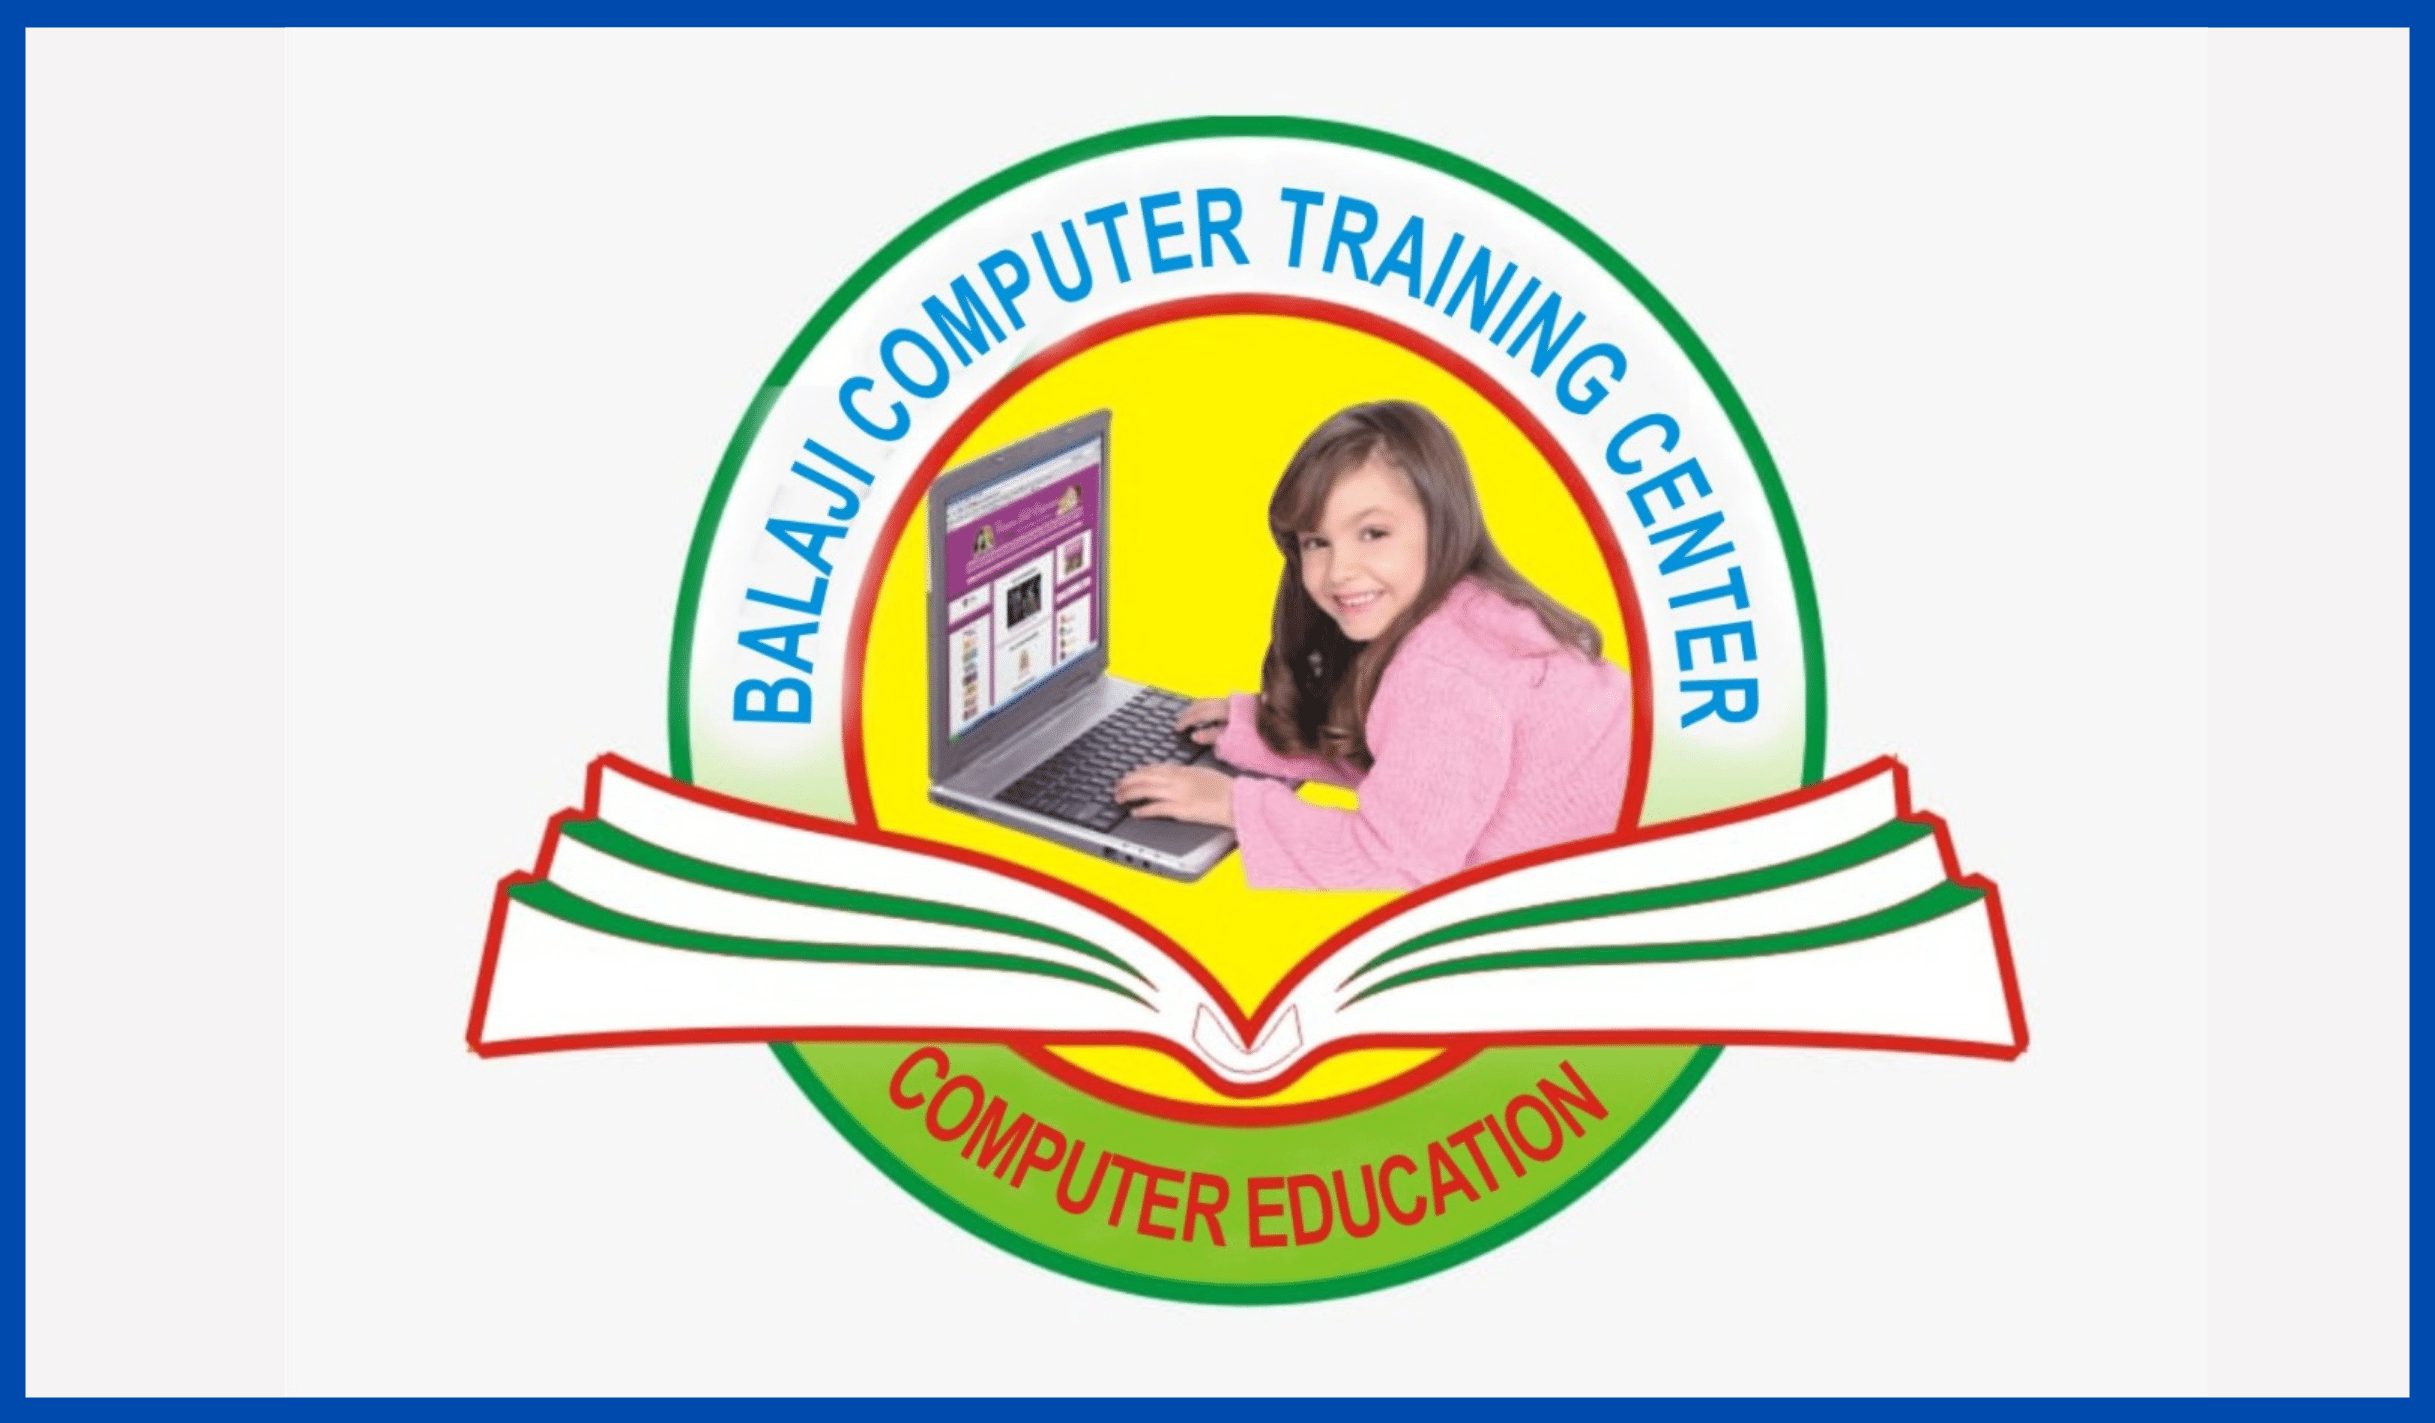 Youth Computer Training Centre, HD Png Download - 600x553(#693263) - PngFind